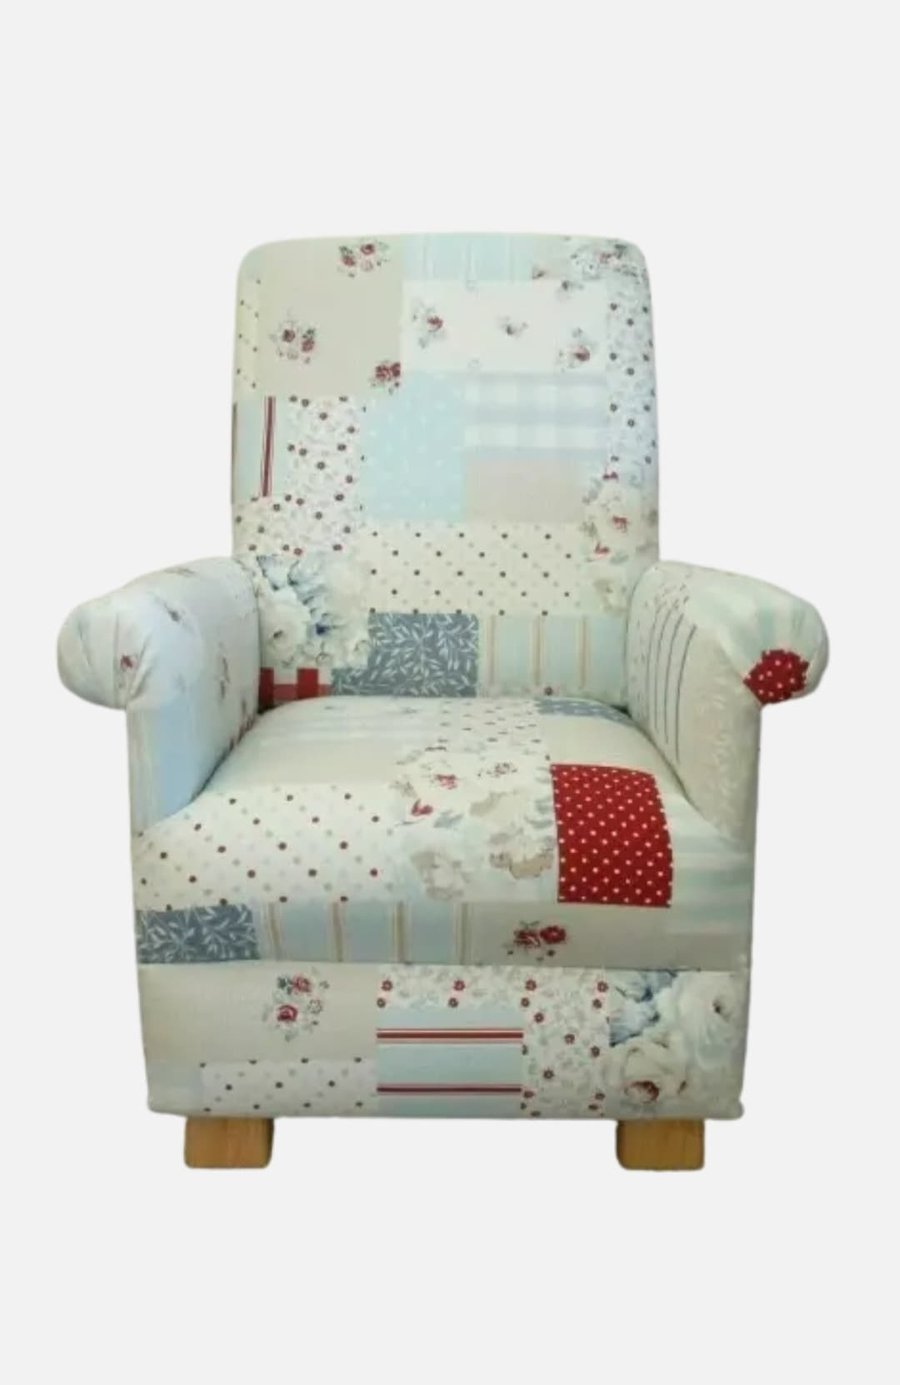 Child's Chair Vintage Patchwork Blue Fabric Kid's Armchair Gingham Spots Red